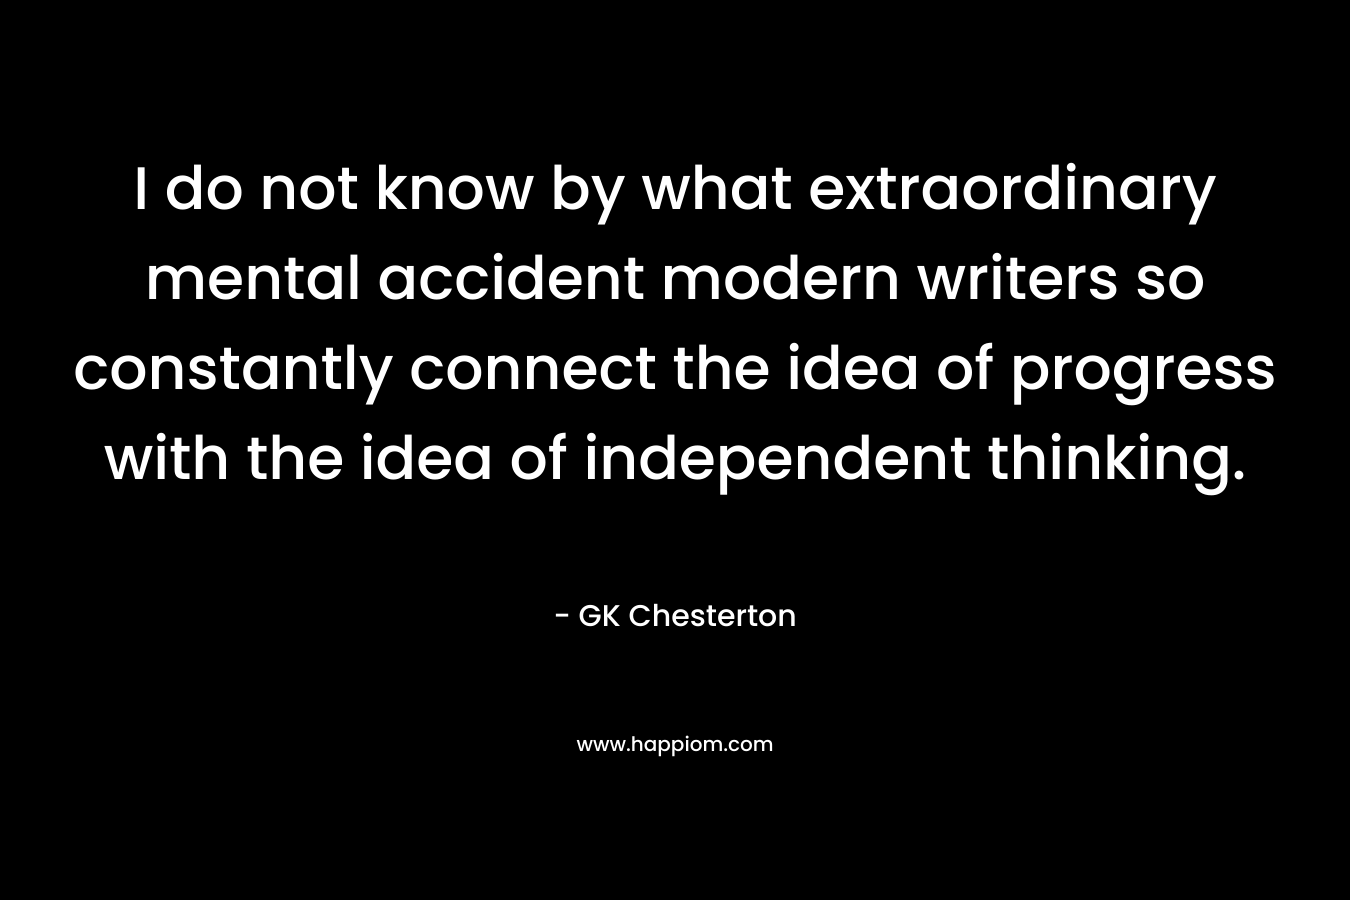 I do not know by what extraordinary mental accident modern writers so constantly connect the idea of progress with the idea of independent thinking.